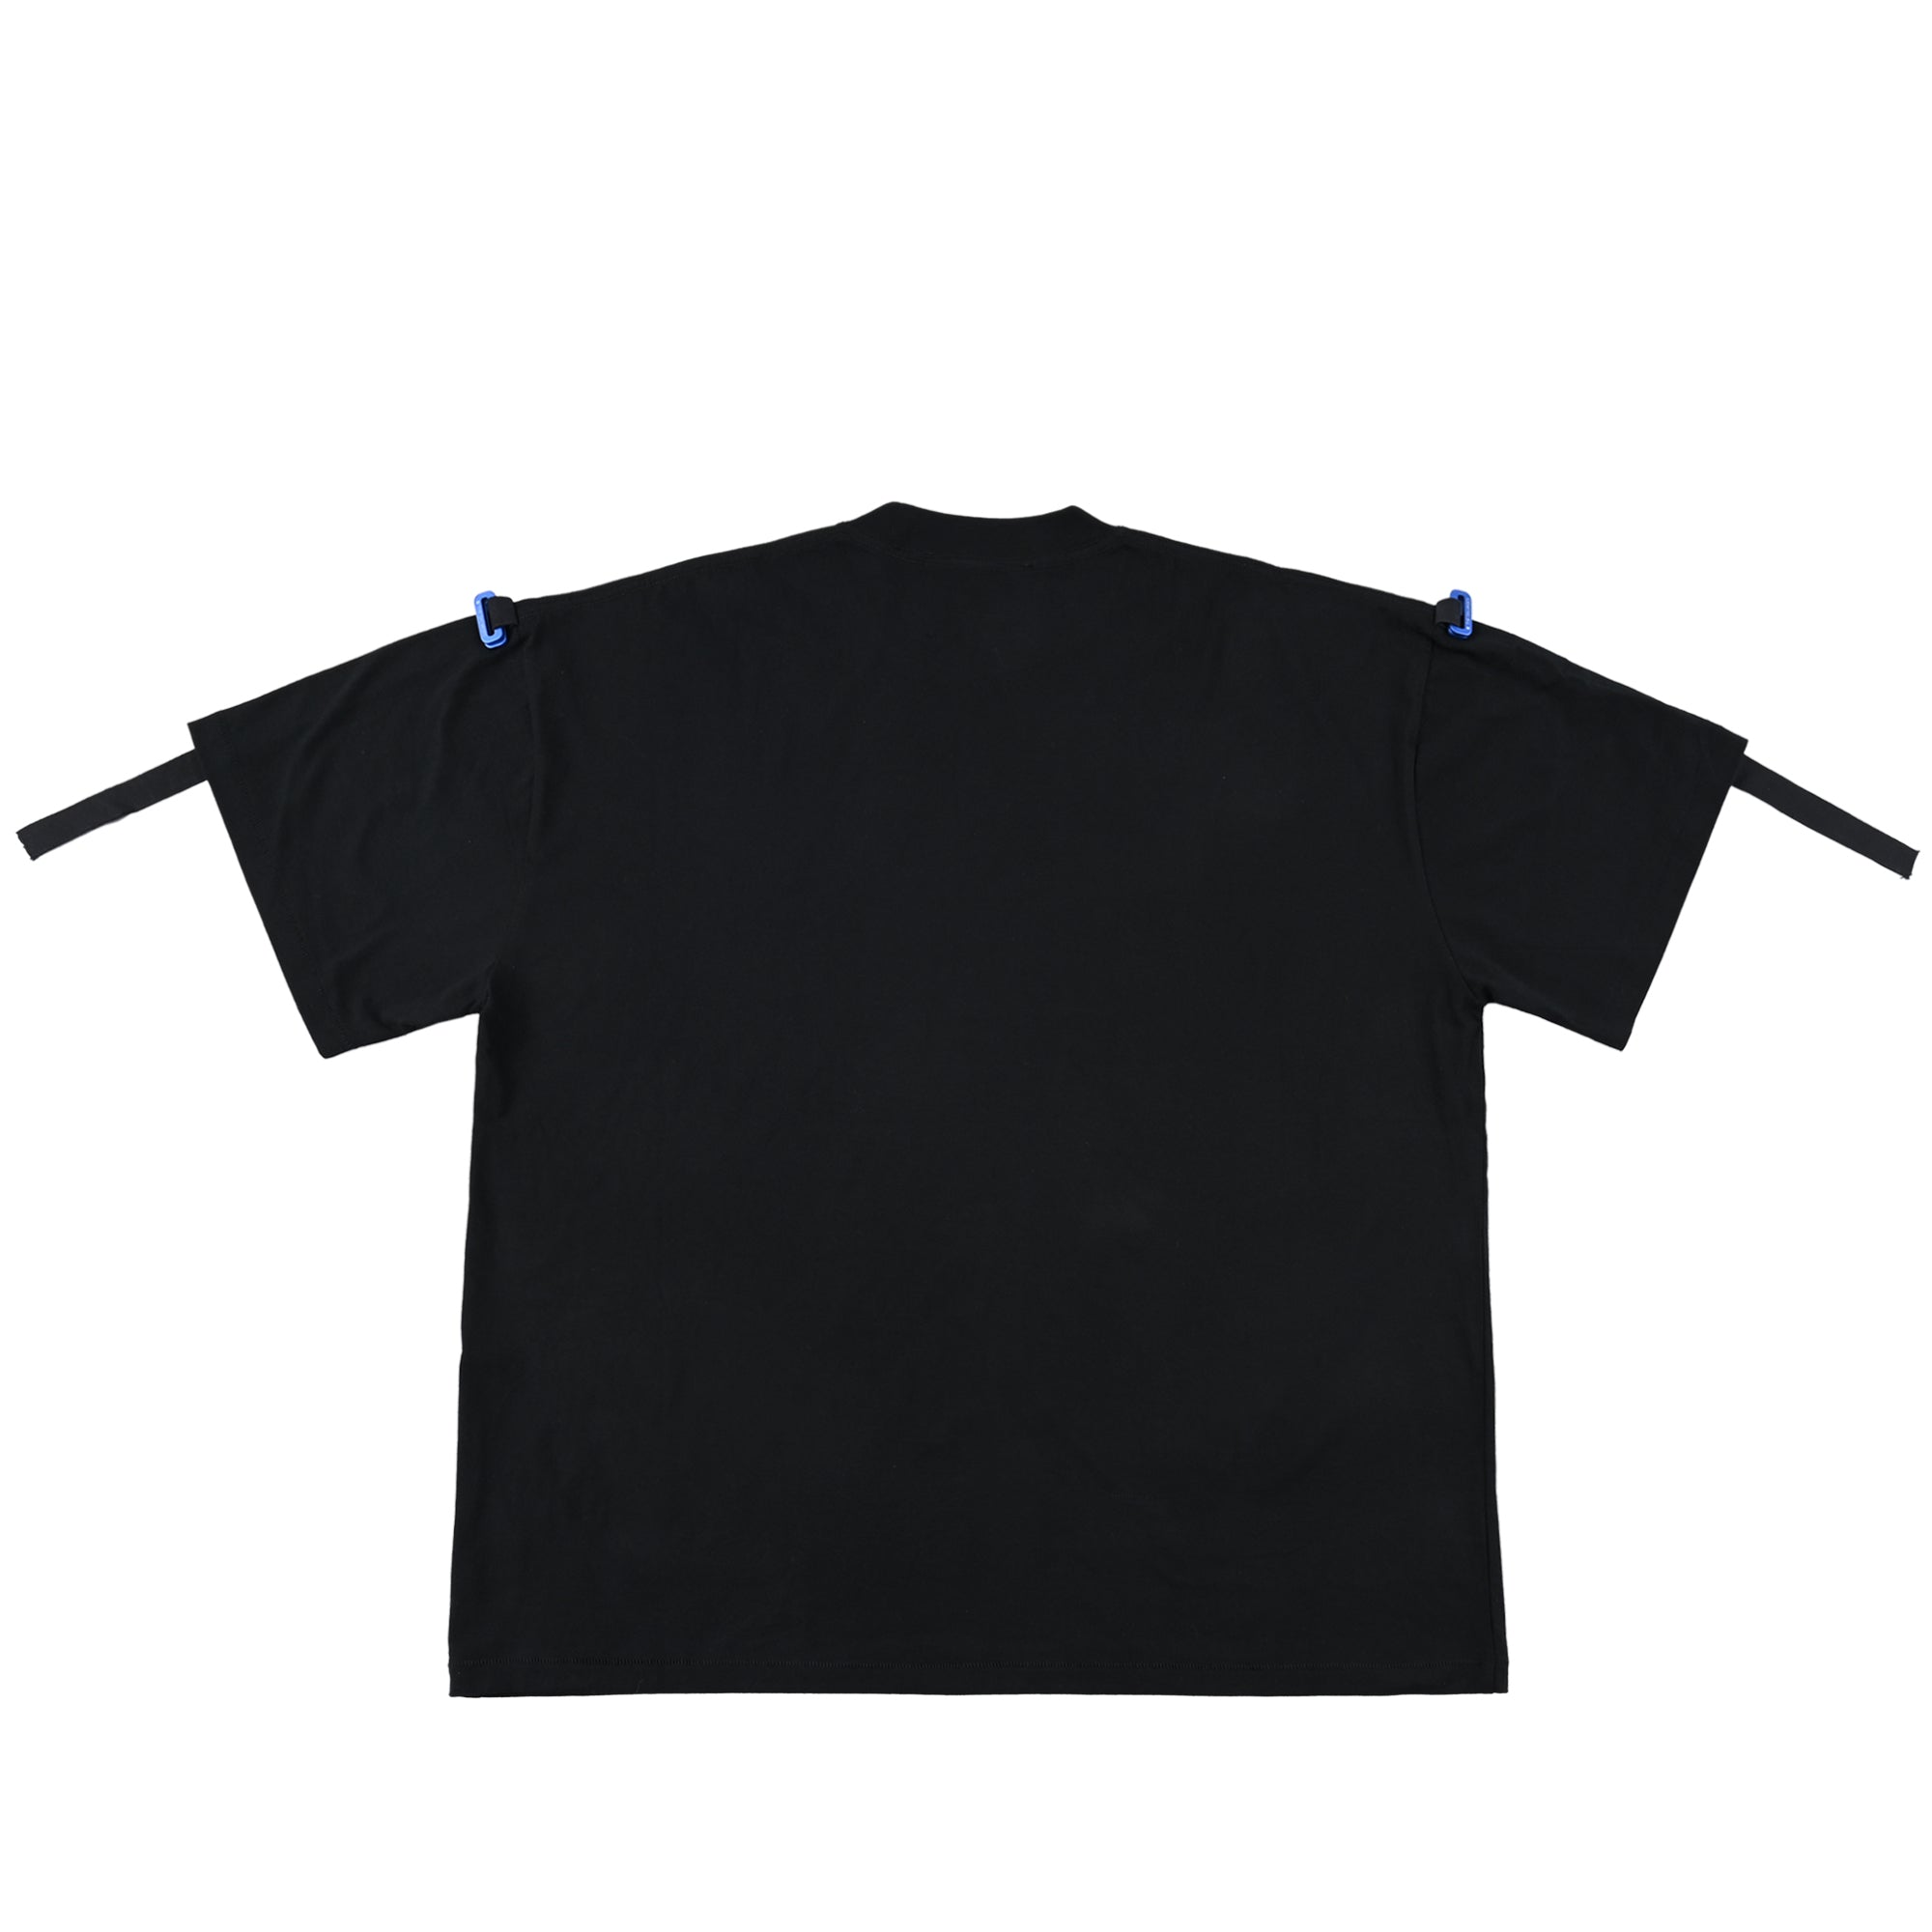 The Salvages AW22 Form & Function D-Ring OS T-Shirt in Black